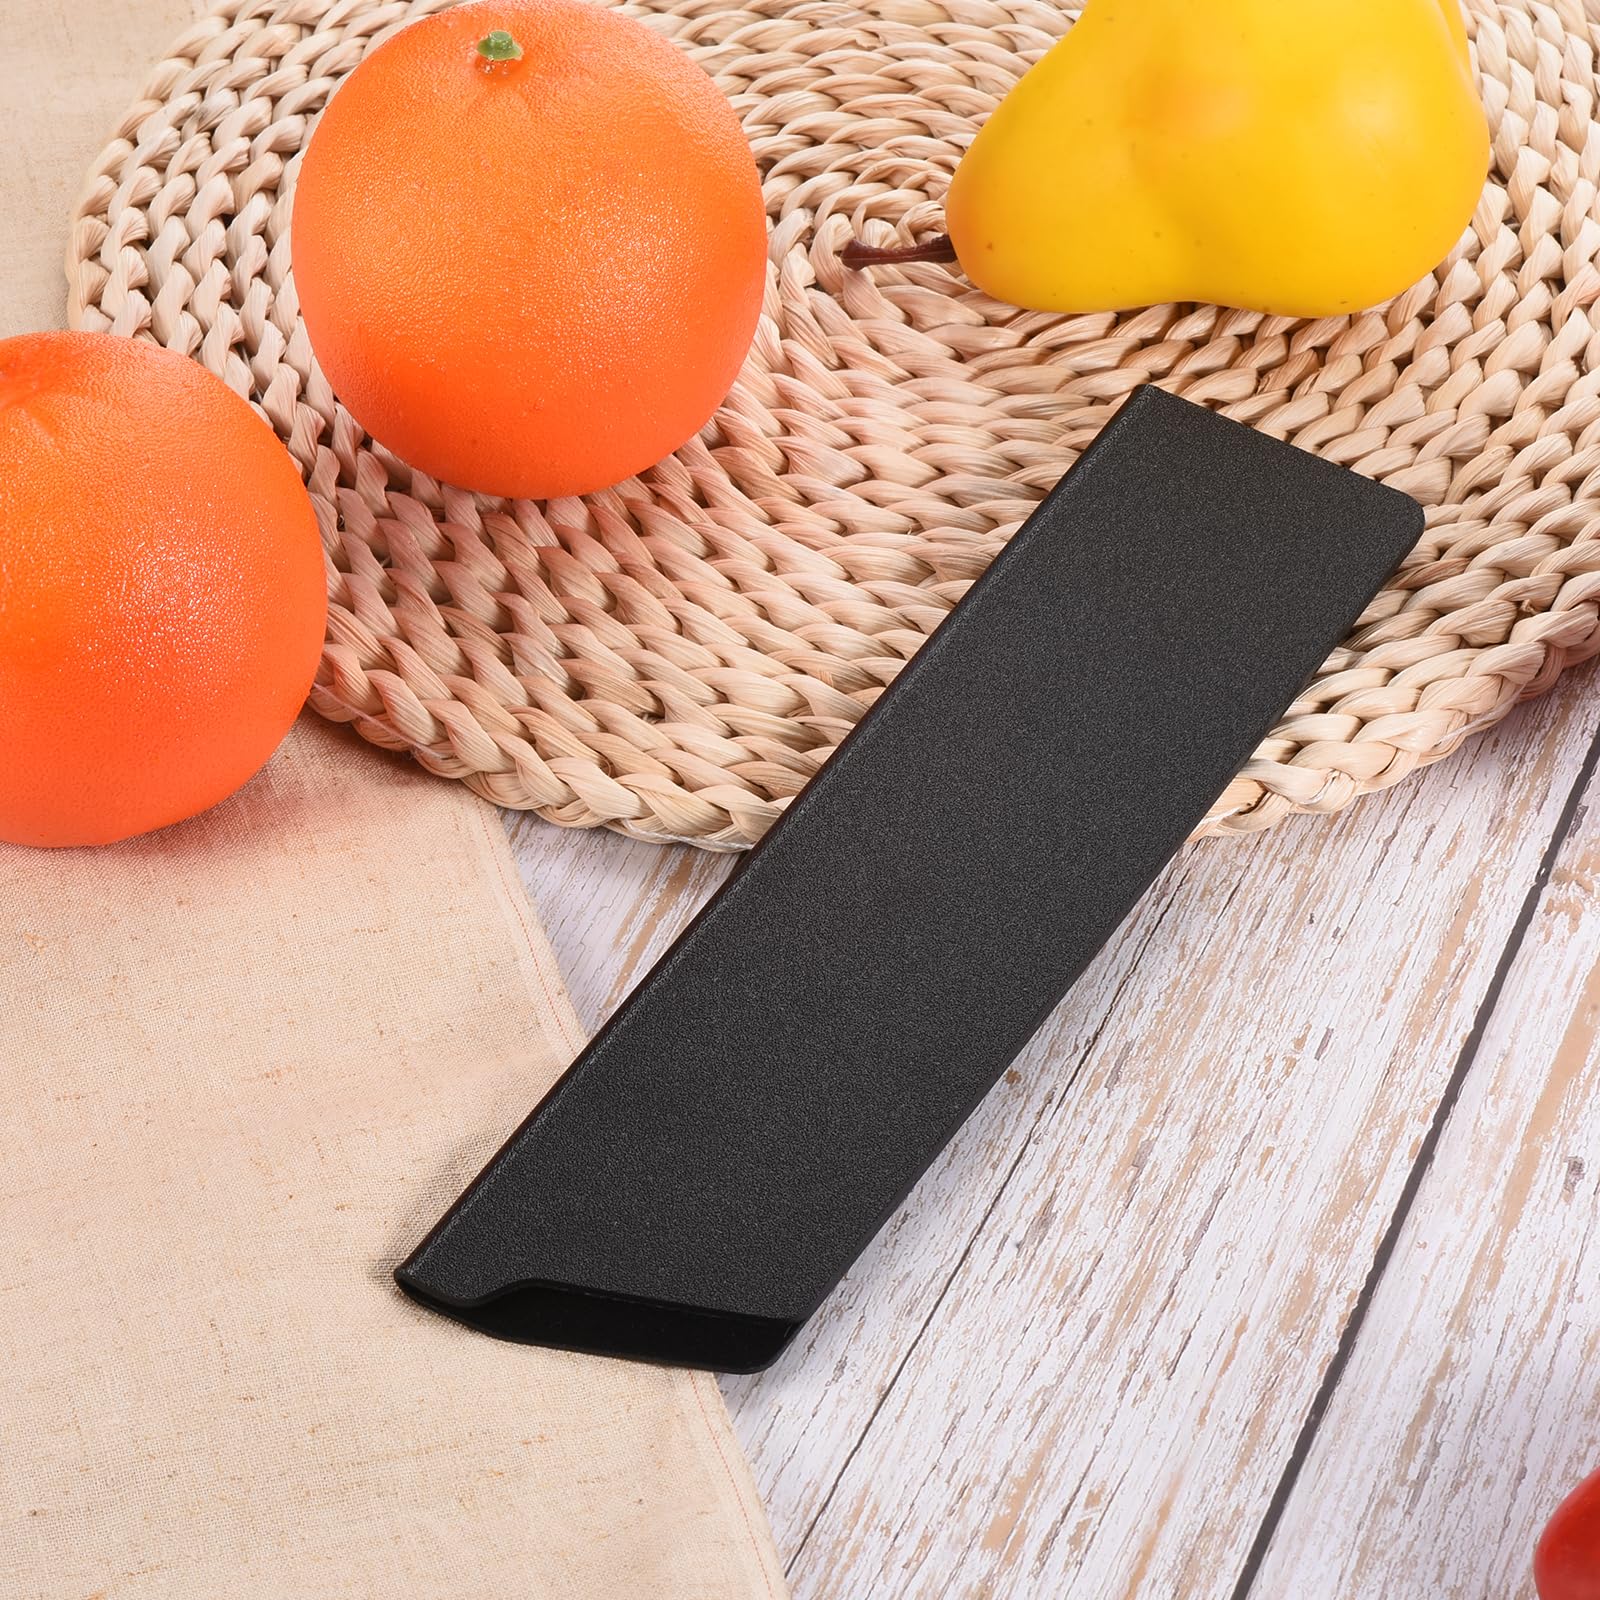 PATIKIL ABS Knife Cover Sleeves for 8" Chef Knife, Knives Edge Guard Blade Protector Universal Knife Sheath for Home Kitchen, Black